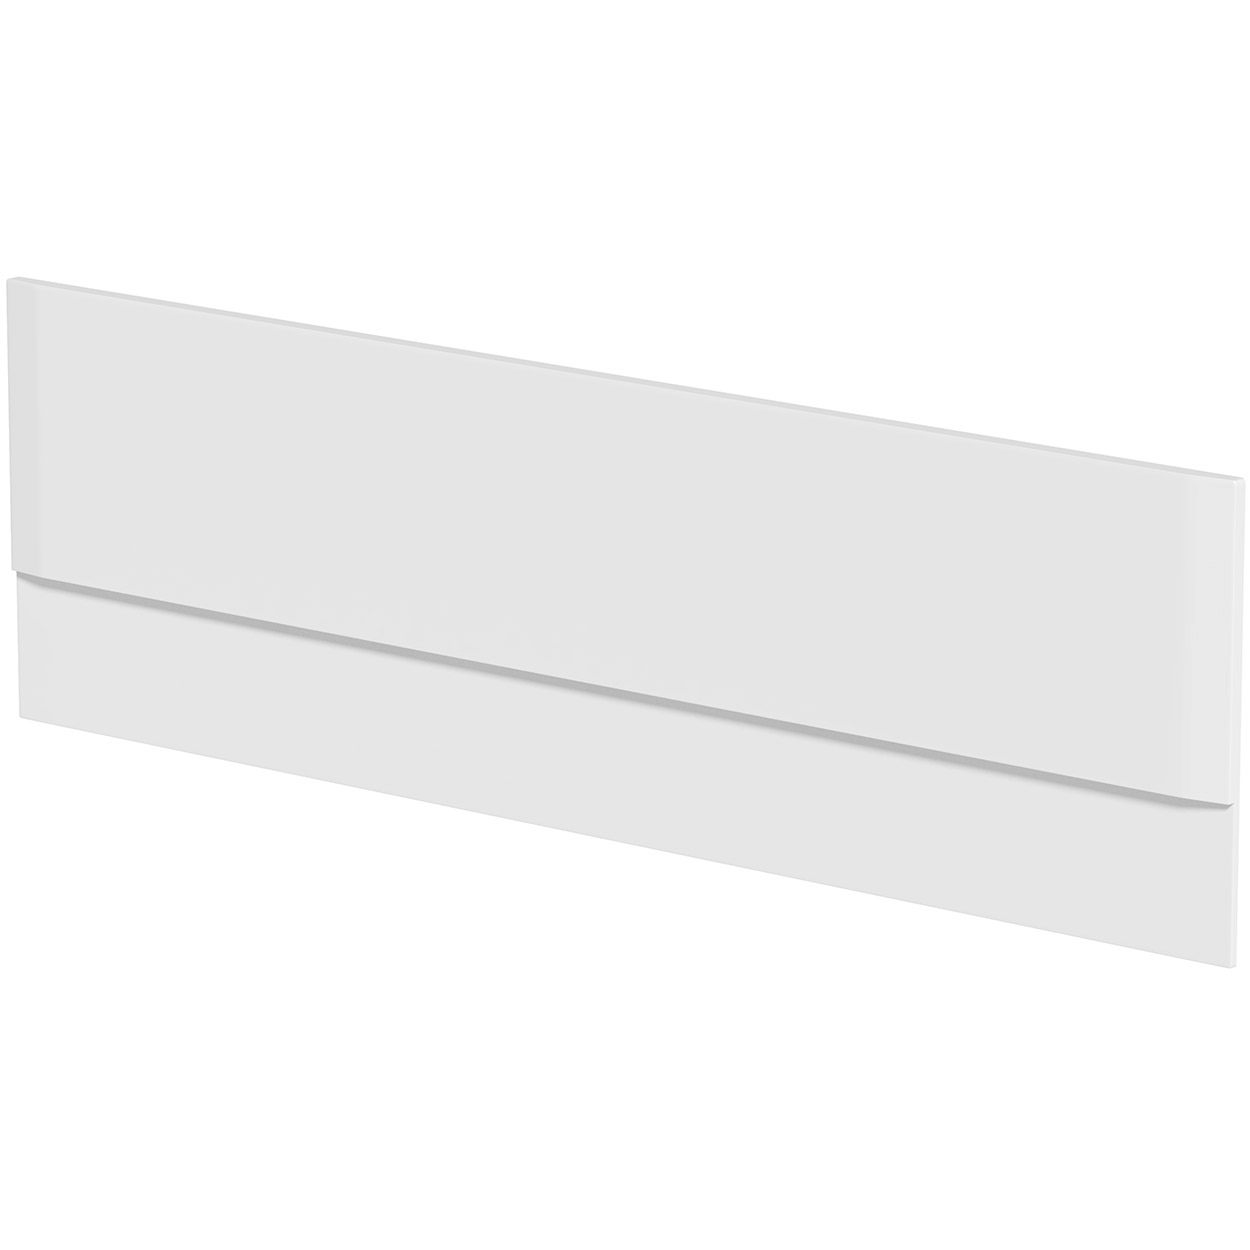 Orchard reinforced straight bath front panel 1700mm